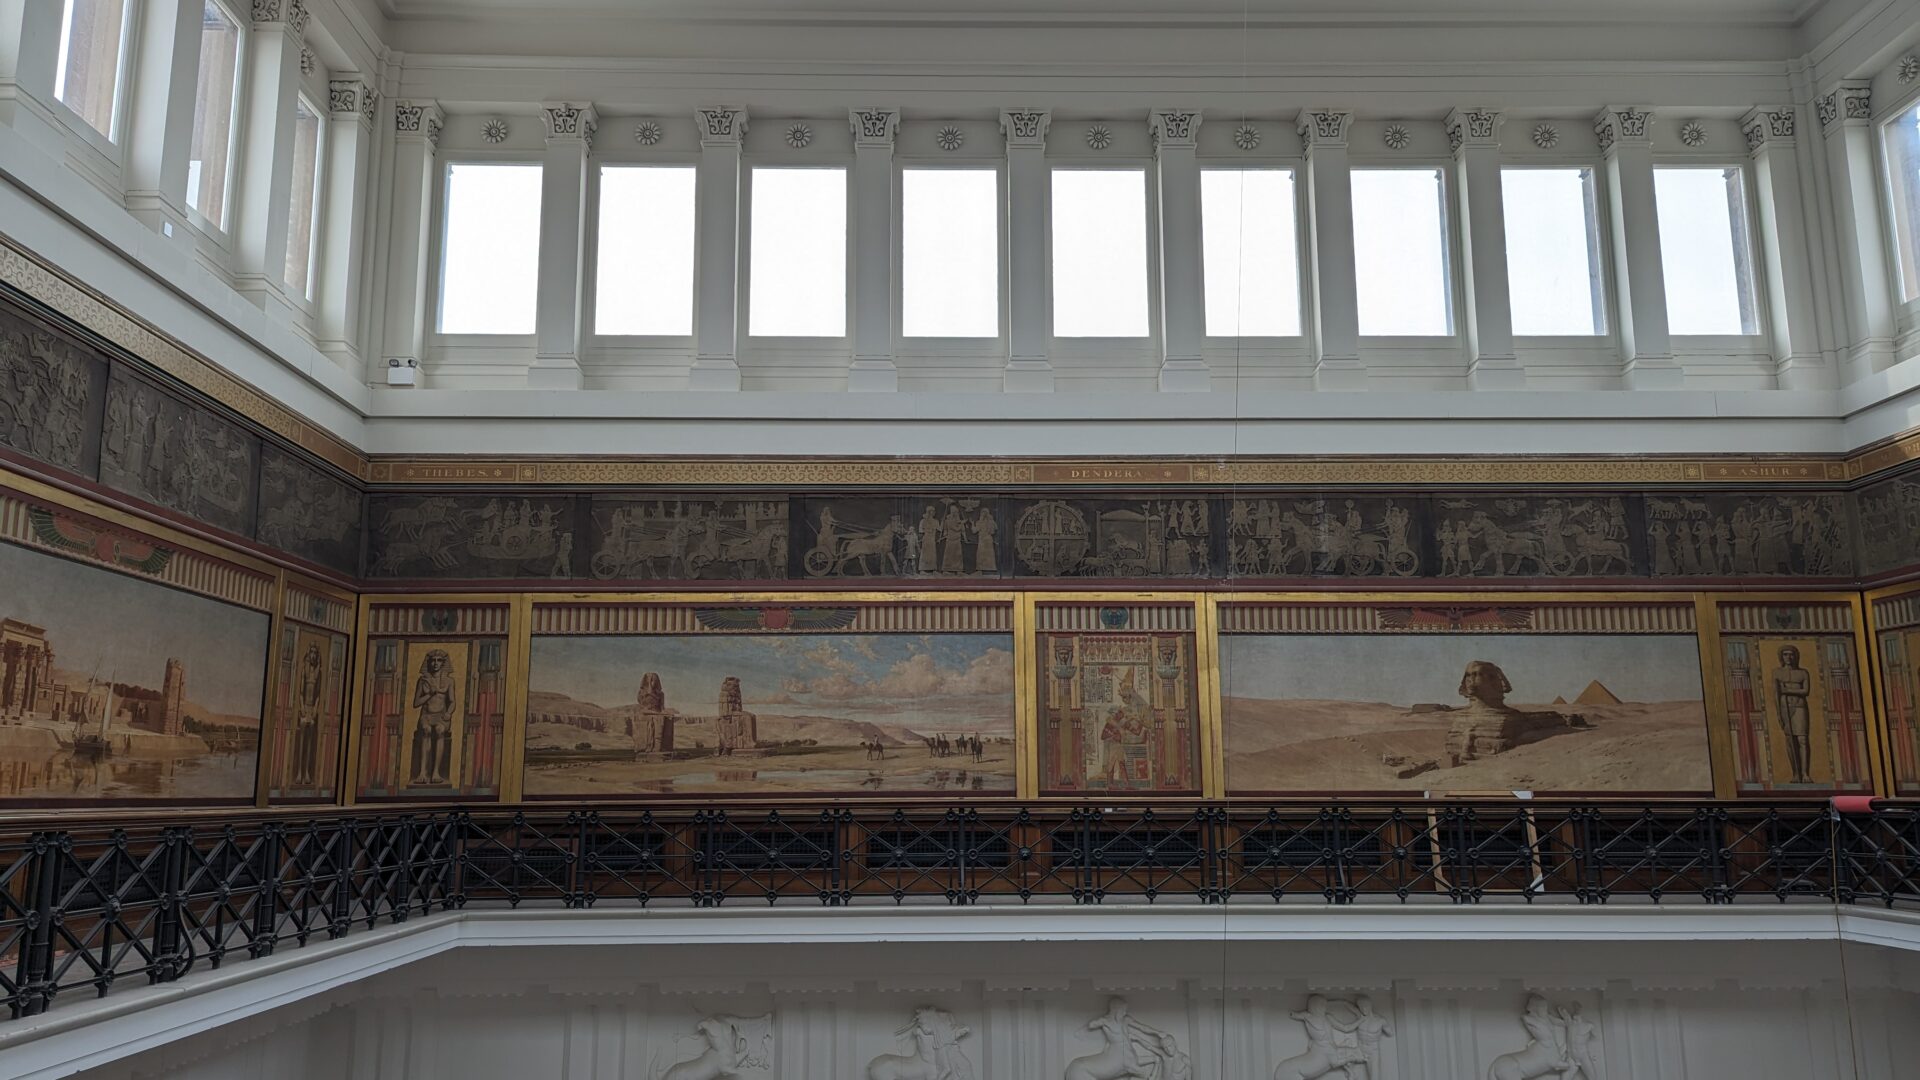 Image taken from the Egyptian Balcony of The Harris.